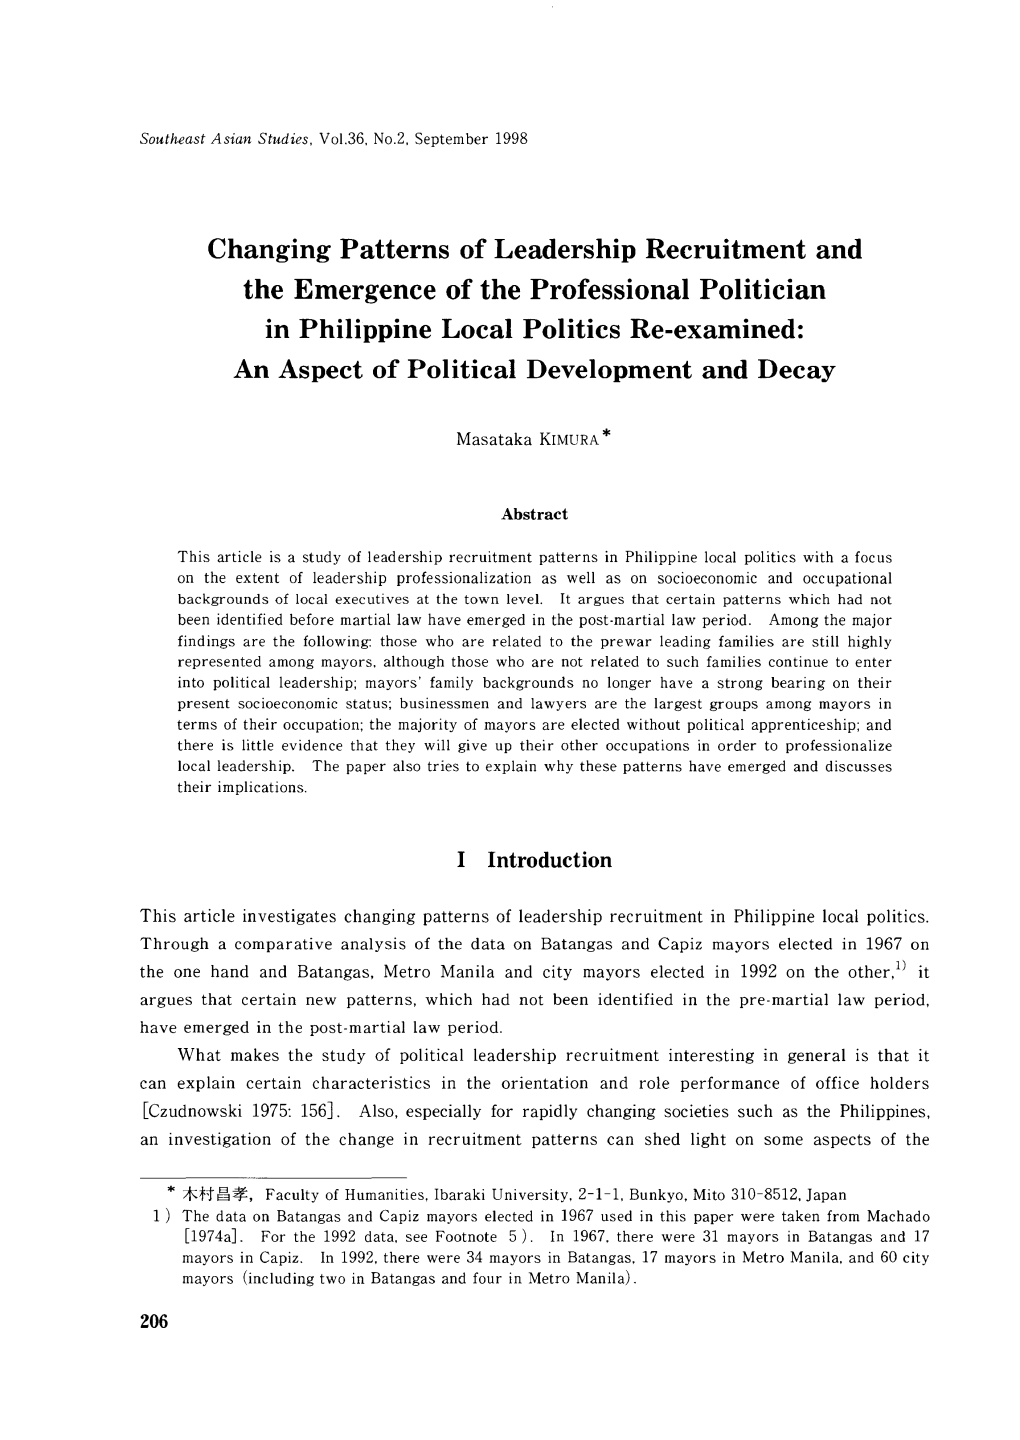 Changing Patterns of Leadership Recruitment and the Emergence Of